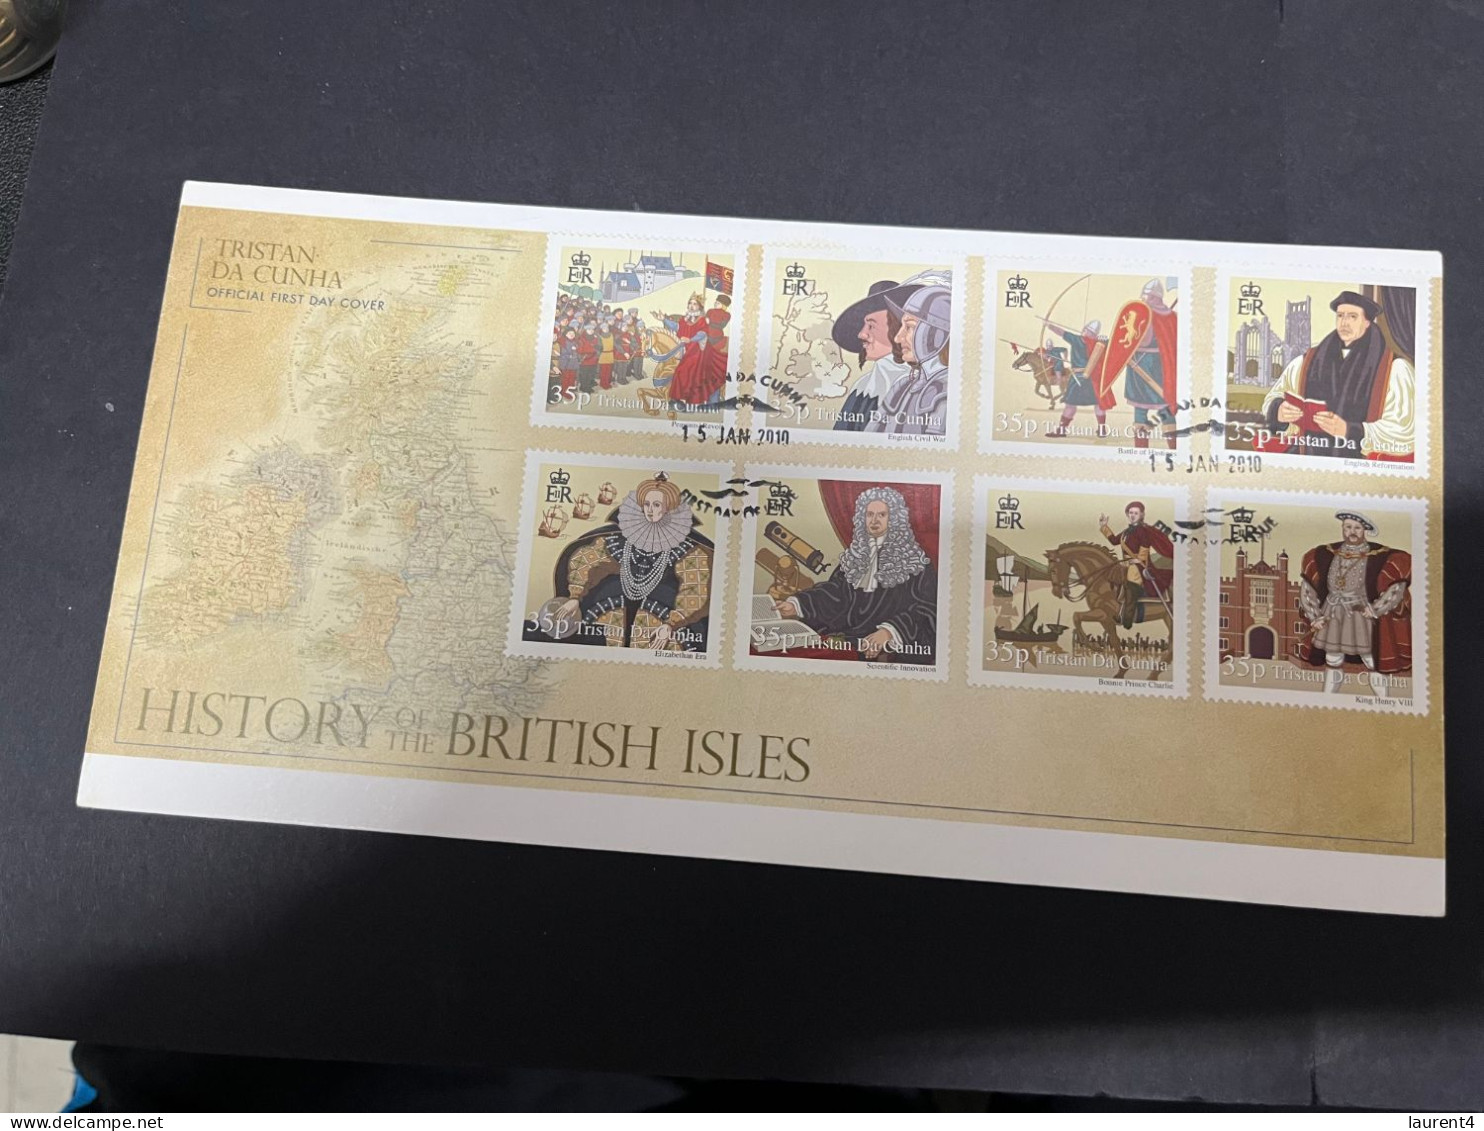 6-12-2023 (1 W 28) UK FDC - Histoy Of The British Isles (2010) - 2001-2010 Decimal Issues